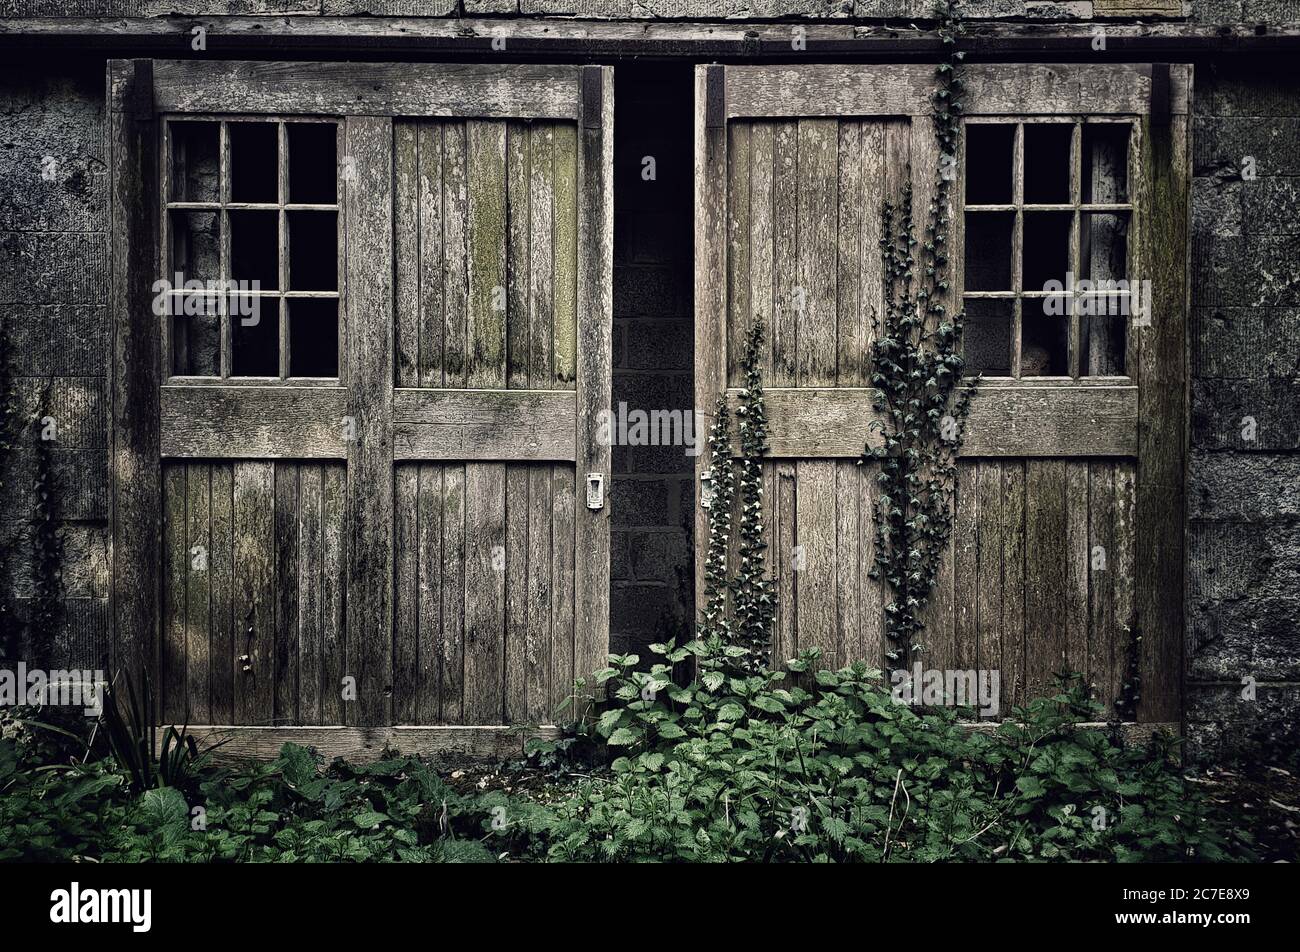 Old wooden doors overgrown with ivy leading through to a bricked up doorway in an old abandoned building Stock Photo